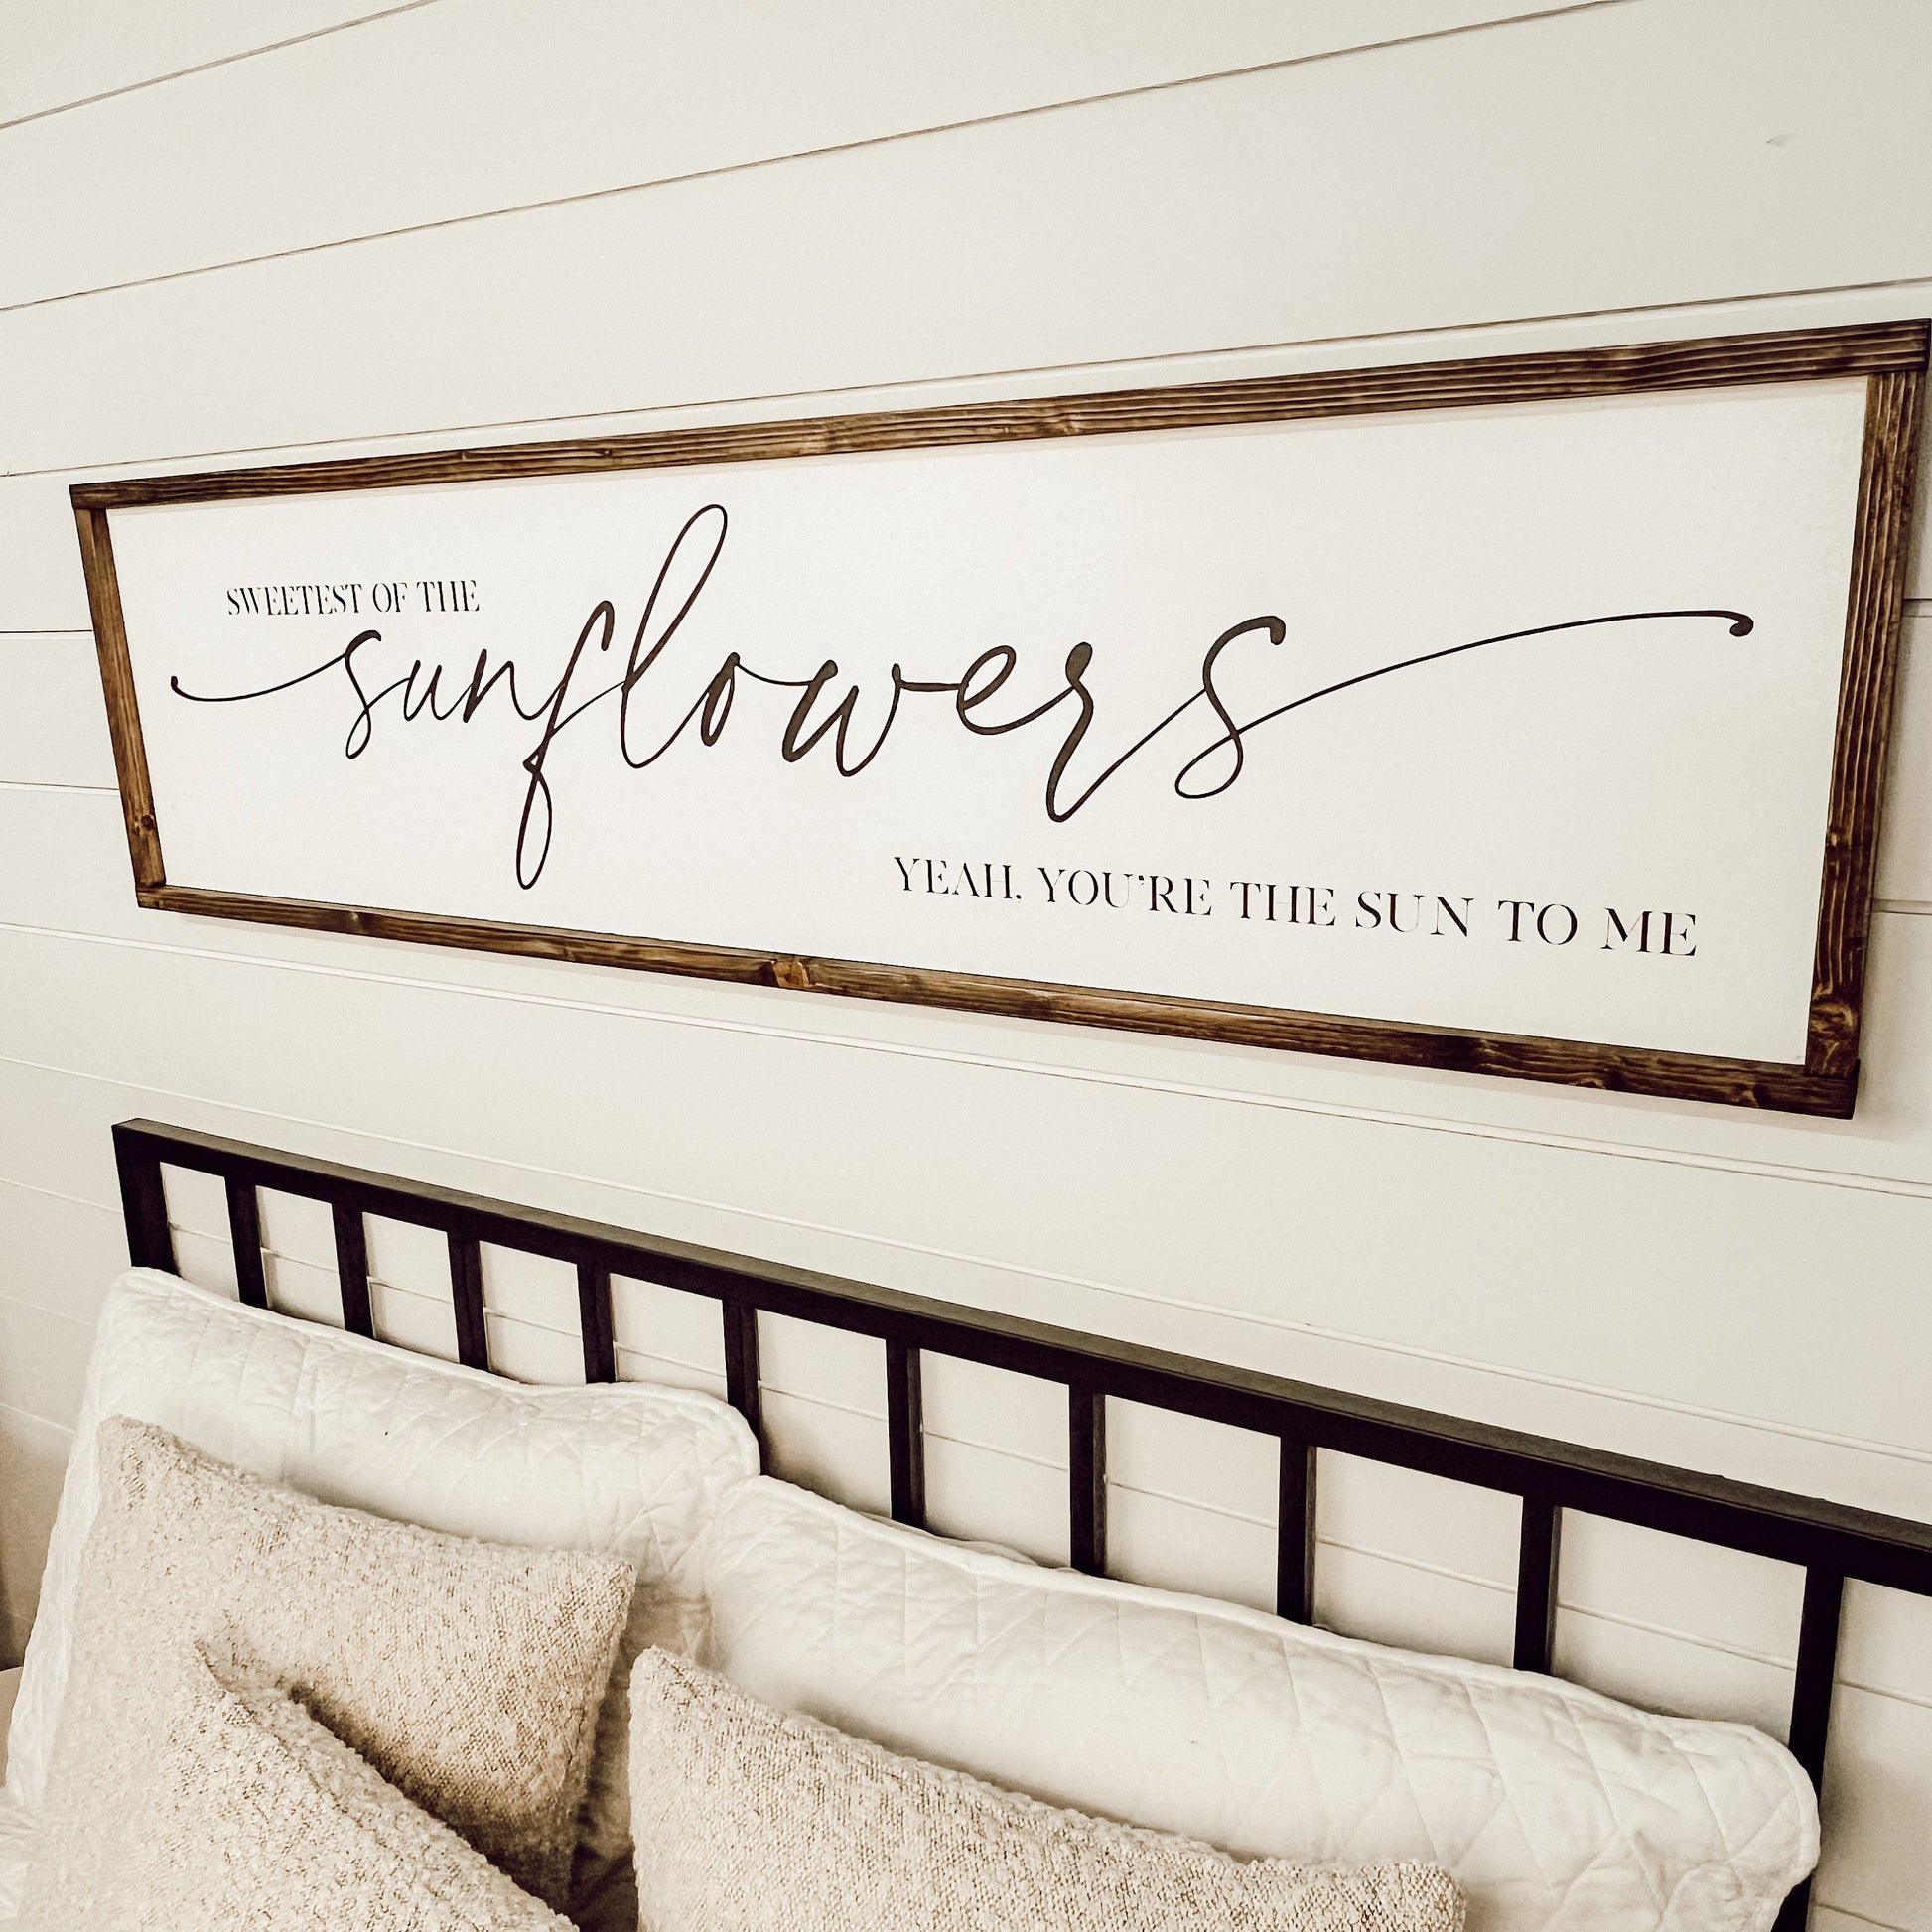 sweetest of the sunflowers - above over the bed sign - zach bryan - master bedroom wall art [FREE SHIPPING!]